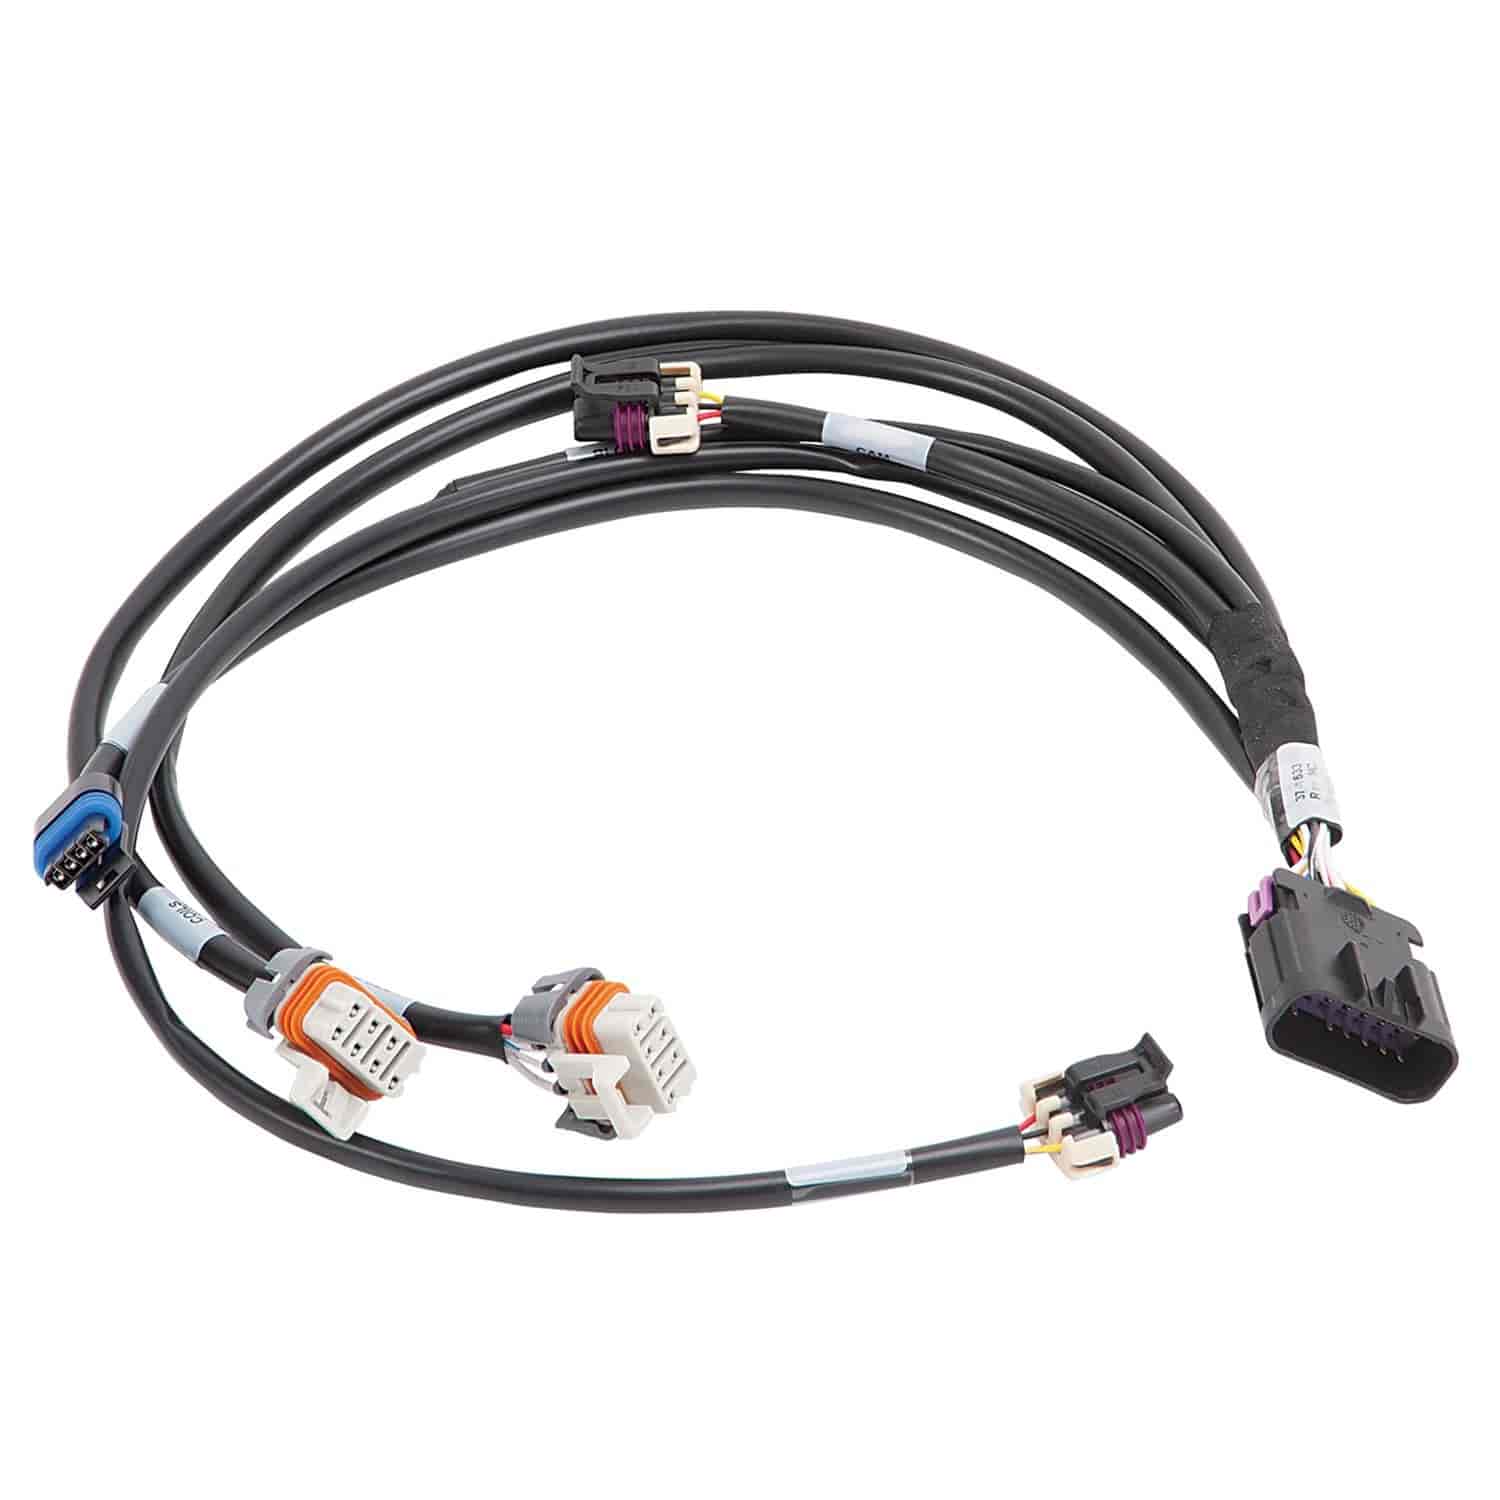 Pro-Flo 4 Ignition/IAC Wiring Harness for GM LS Gen III Engine with 24X Reluctor